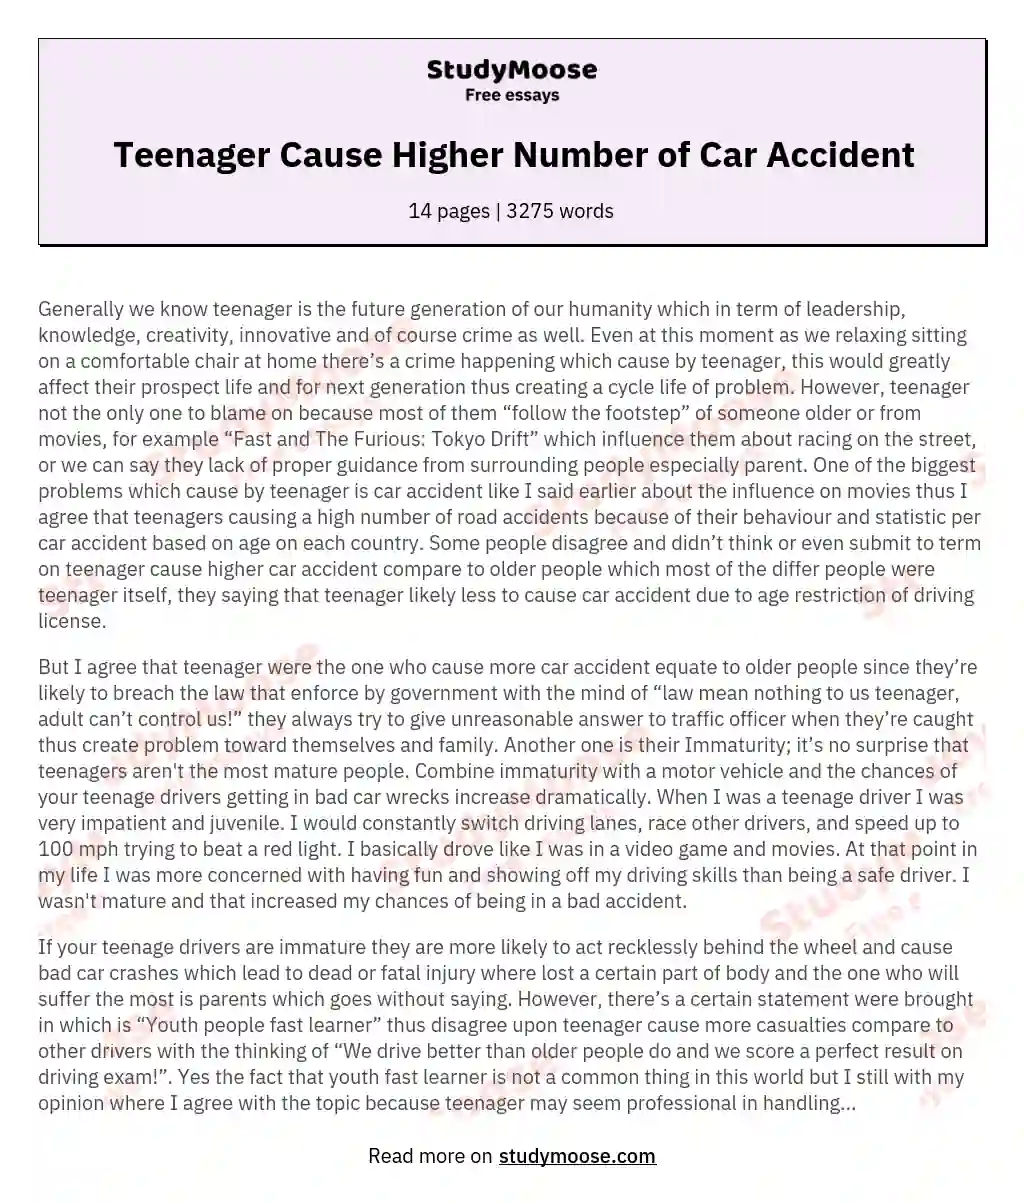 Teenager Cause Higher Number of Car Accident